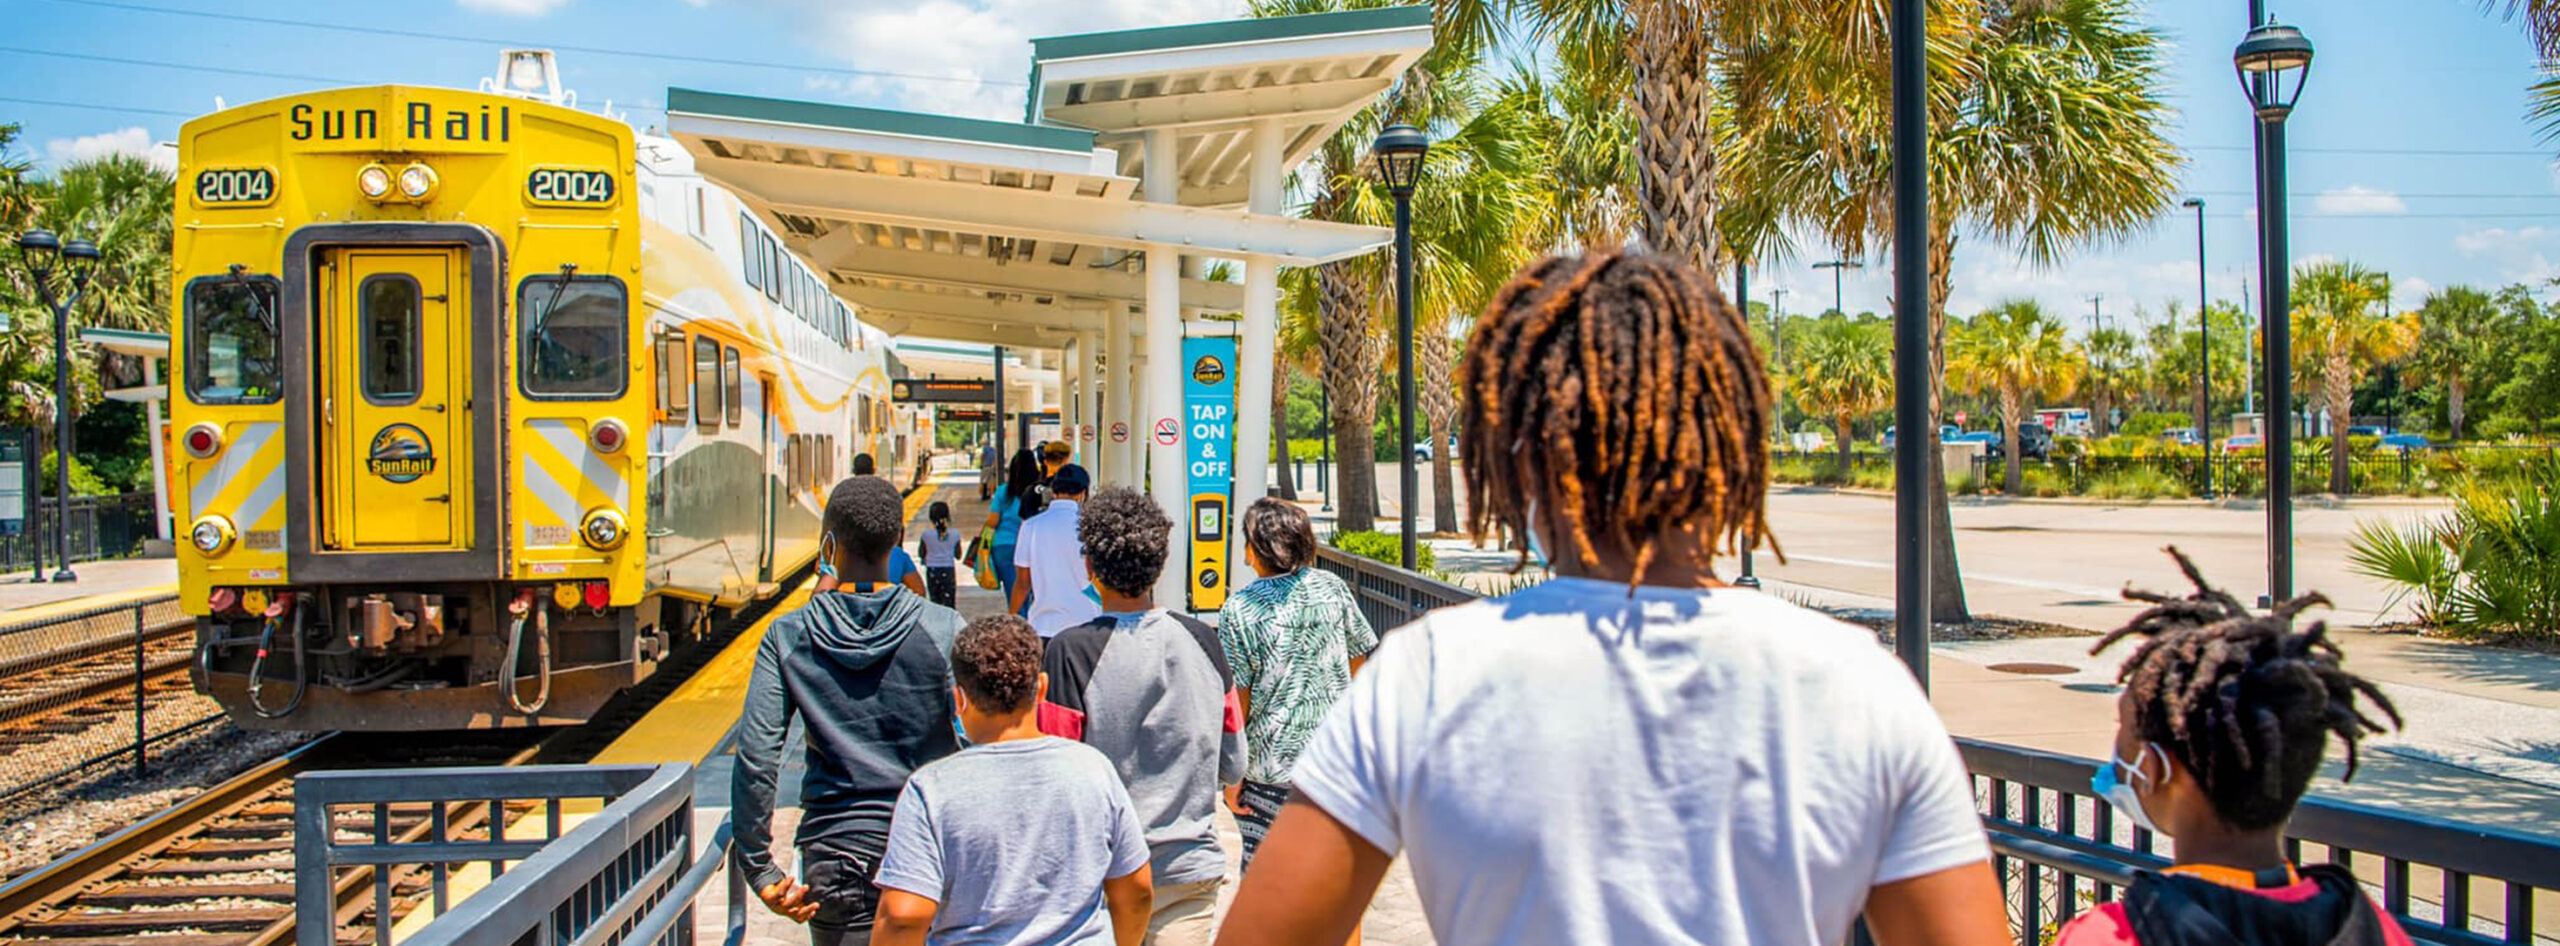 Masthead image - Group of kids approaching SunRail Train for a group ride.